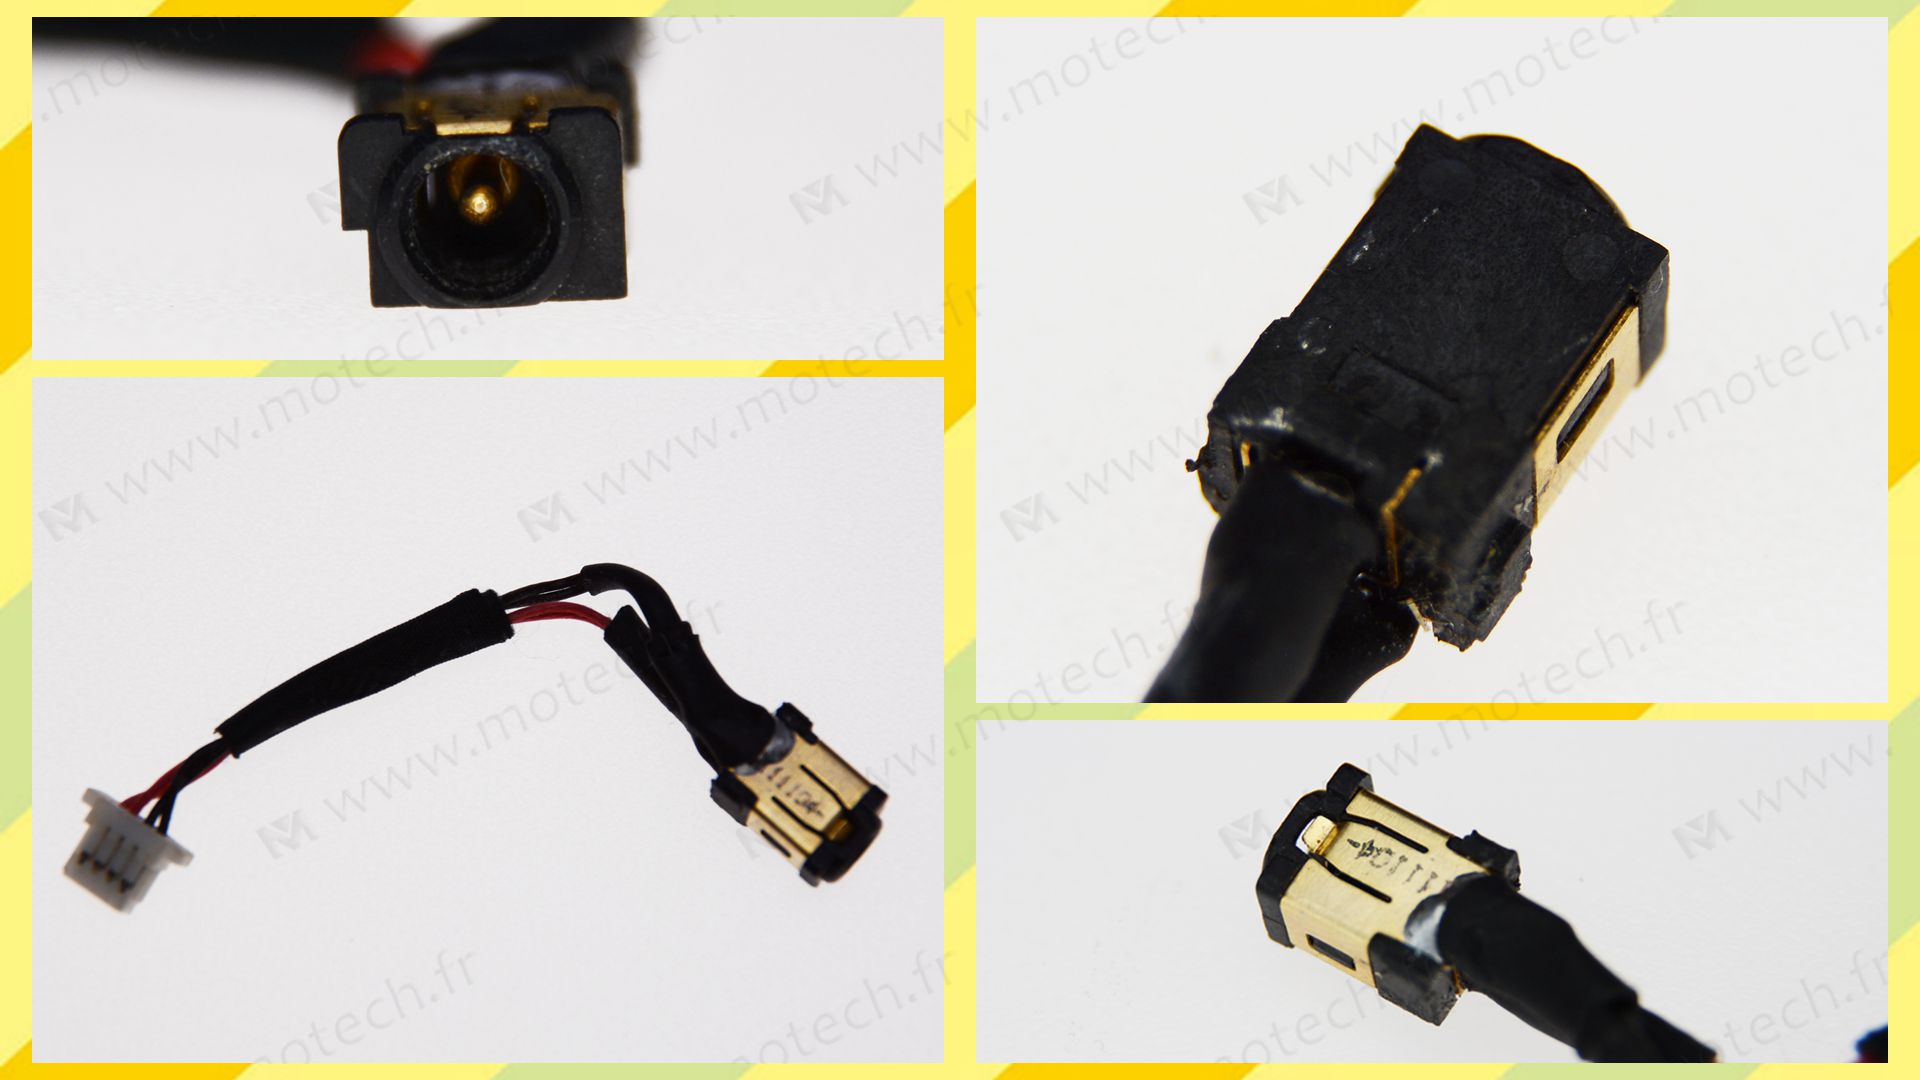 Acer S7-392 charging connector, Acer S7-392 DC Power Jack, Acer S7-392 DC IN Cable, Acer S7-392 Power Jack, Acer S7-392 plug, Acer S7-392 Jack socket, Acer S7-392 connecteur de charge, 